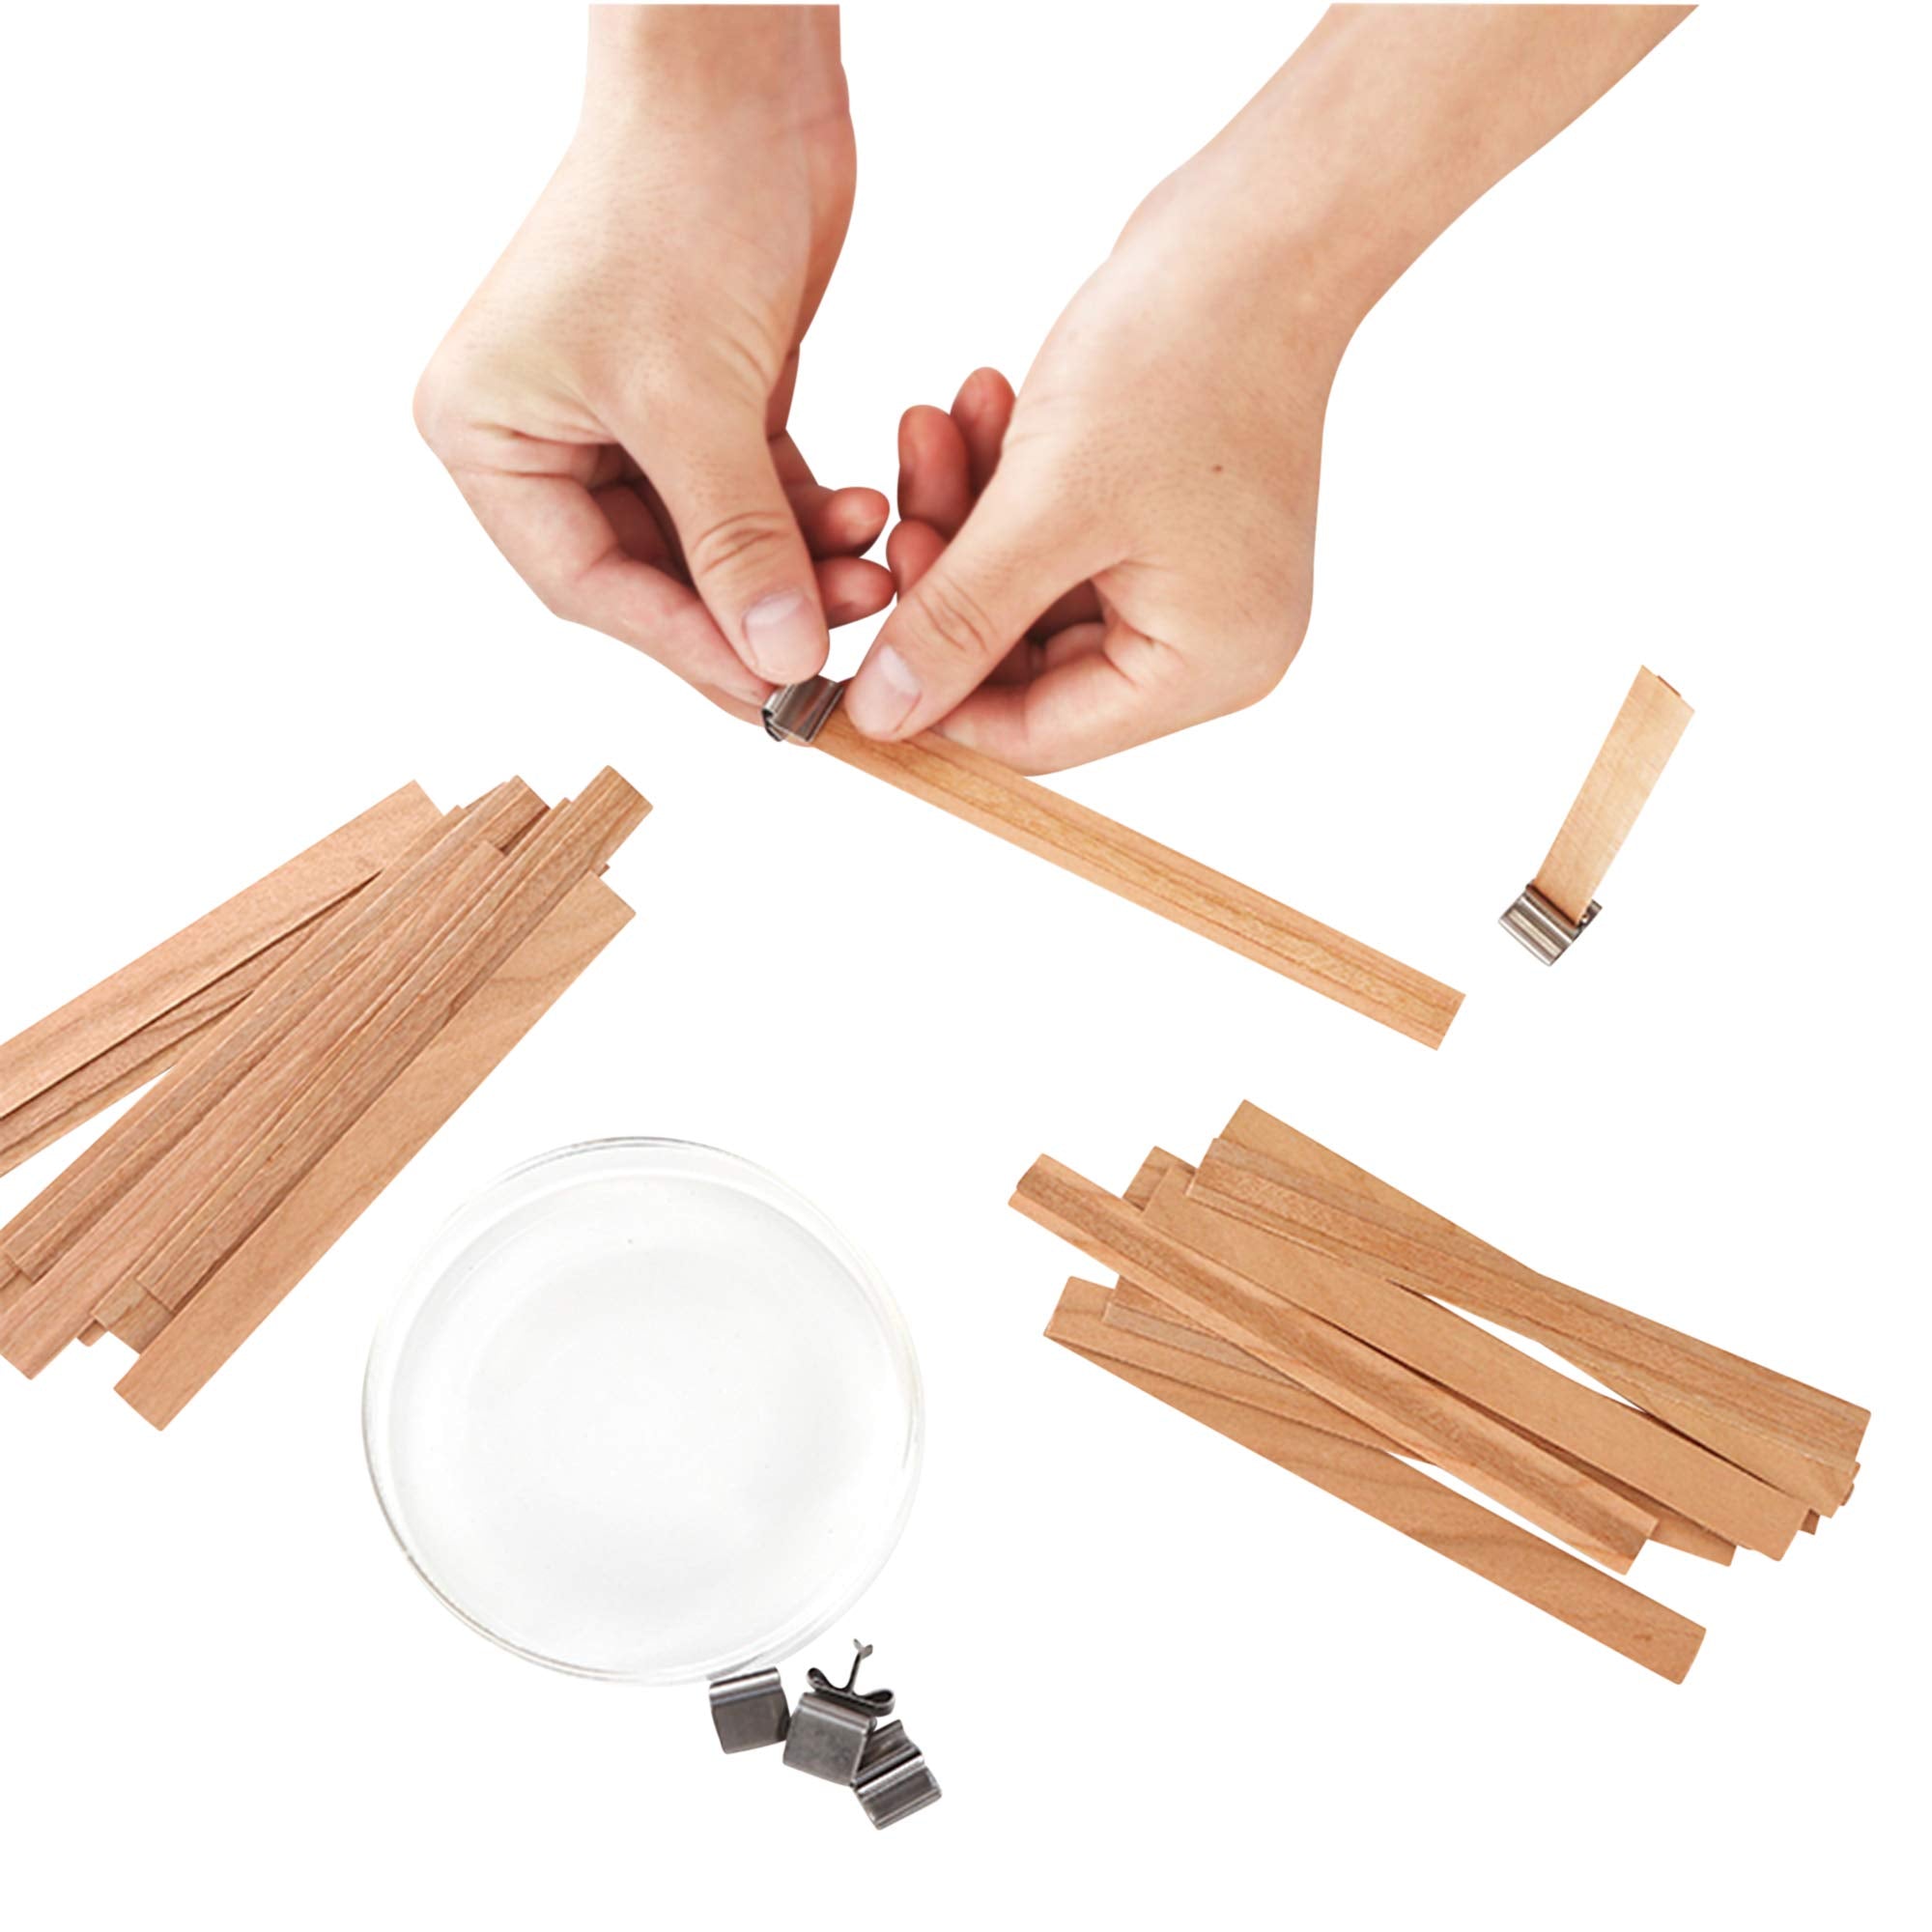 Crackling Wooden Wicks for Candles - with EVA Stickers, Warning